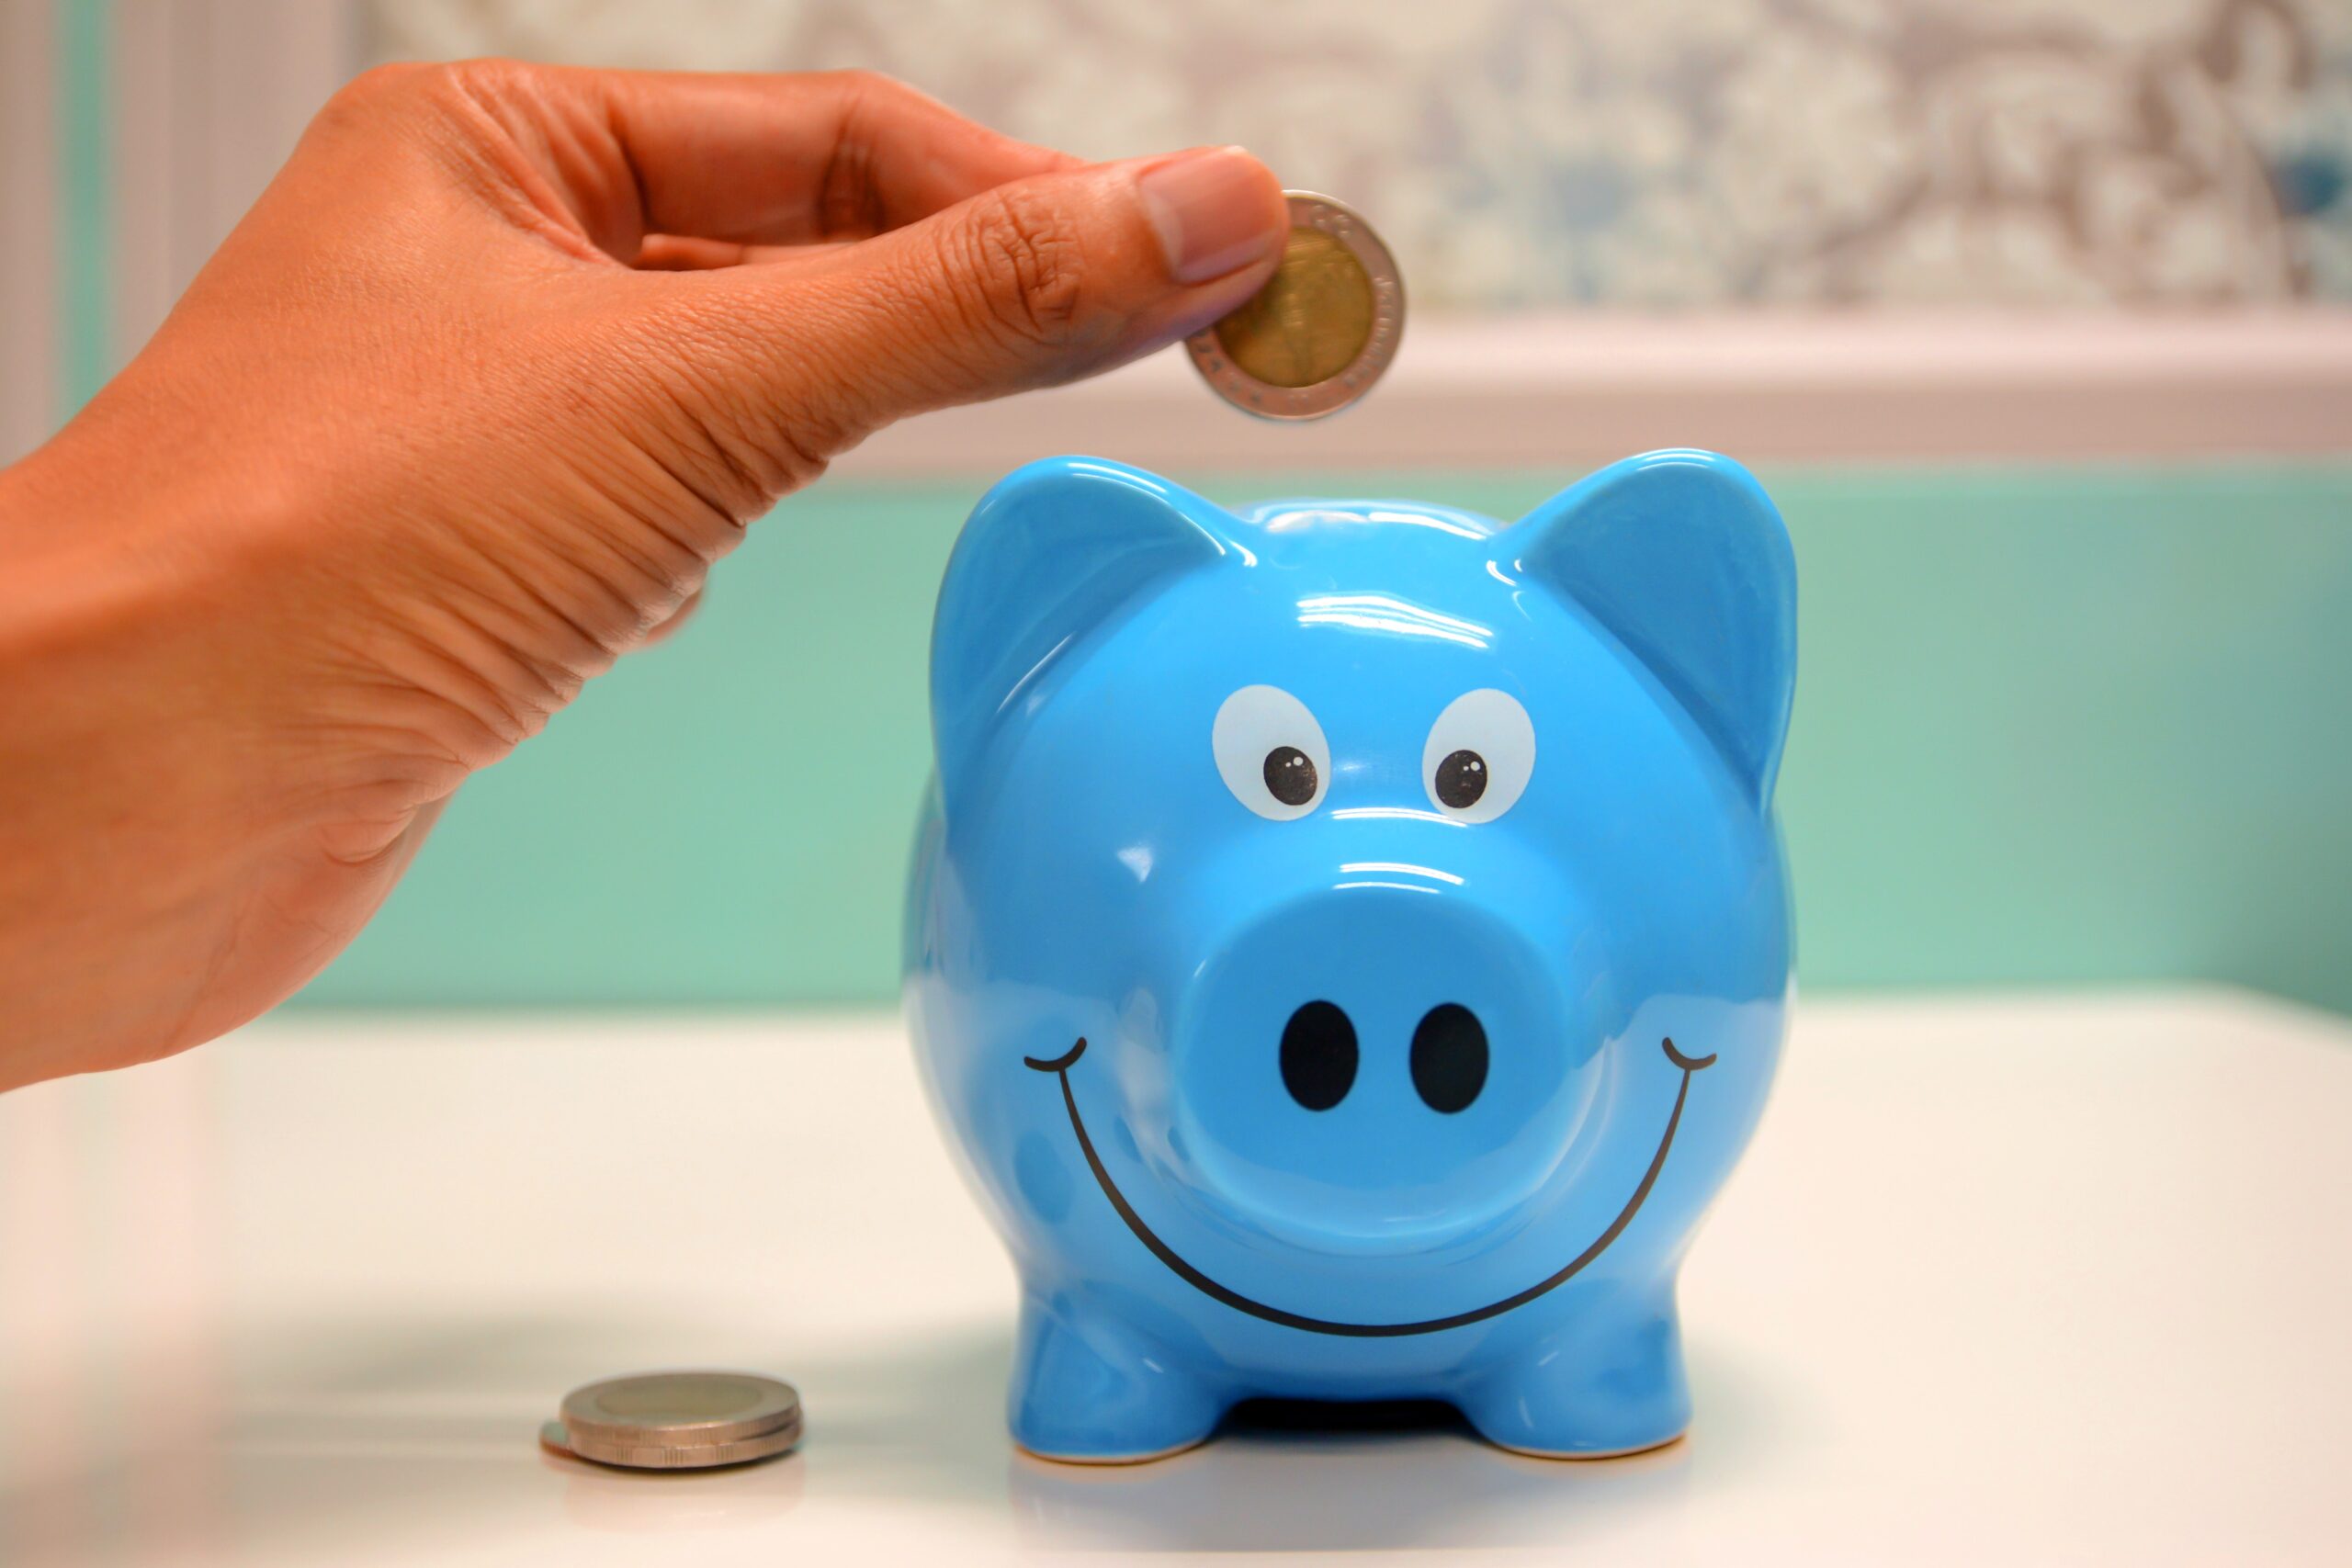 a blue piggy bank is getting a coin put in the slot on it's back. The piggy bank has a huge friendly smile